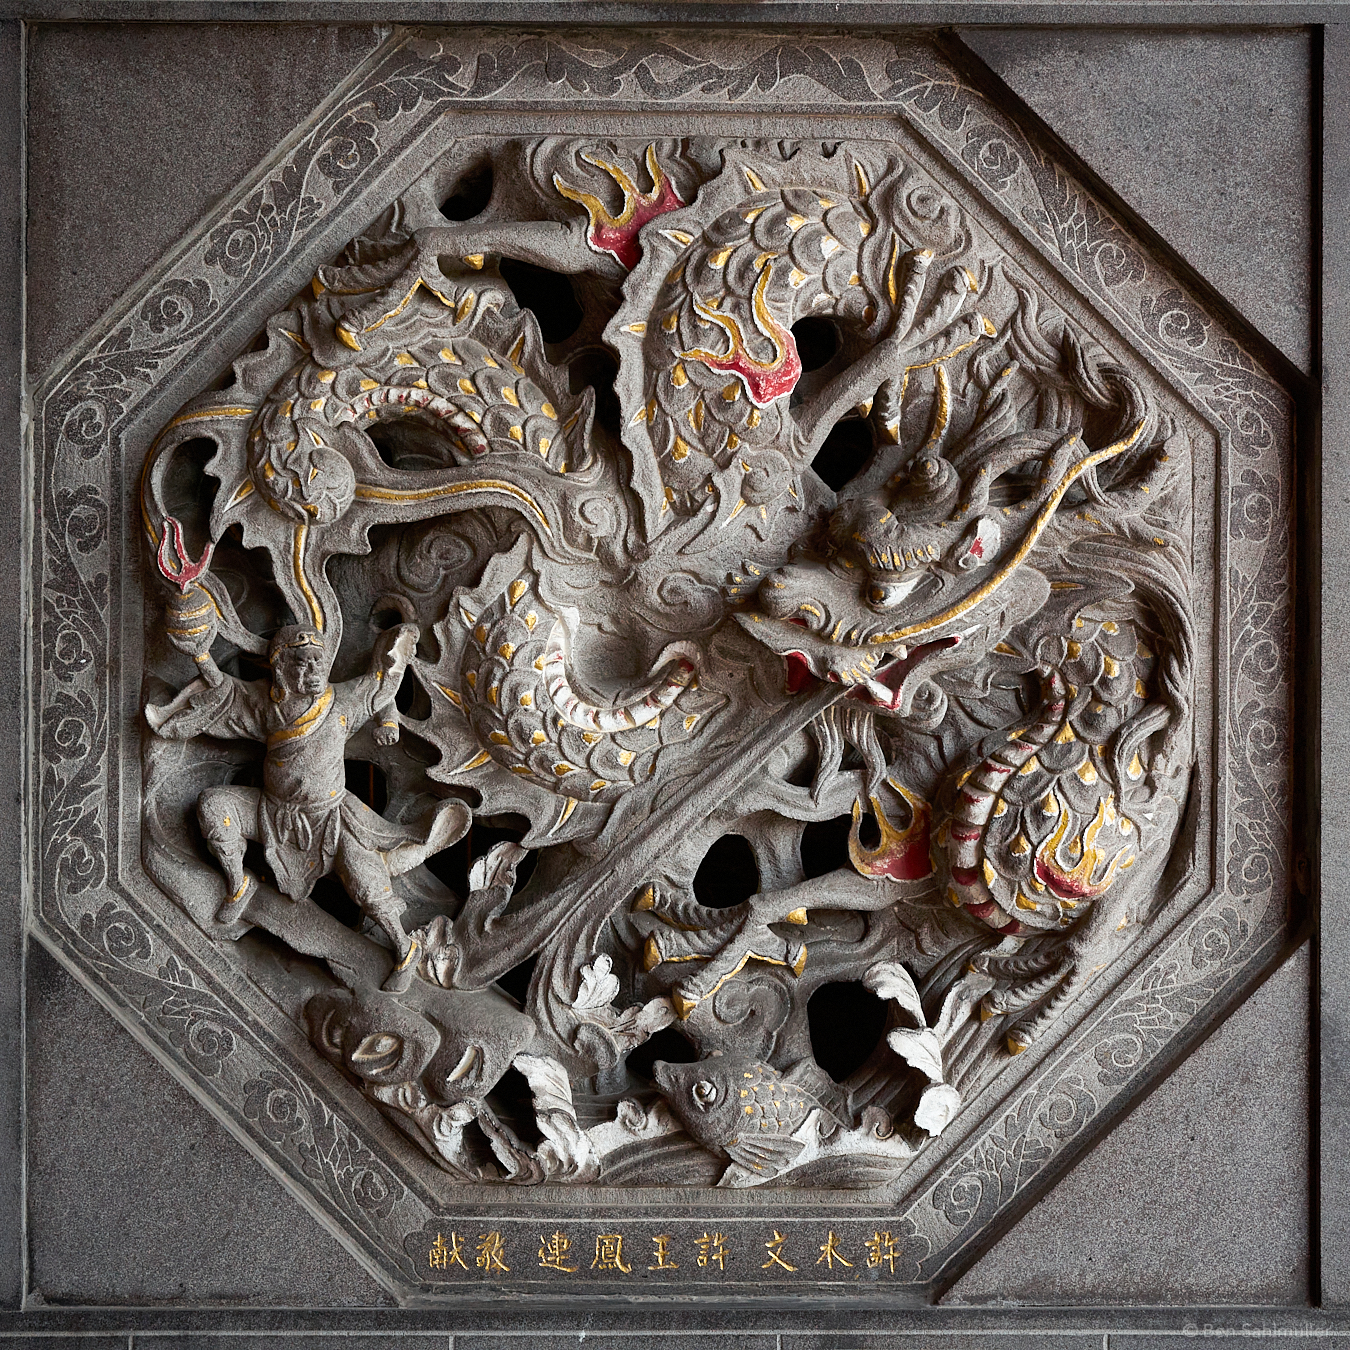 A stone sculpture in a wall. It depicts a dragon fighting against a warrior holding a grenade.